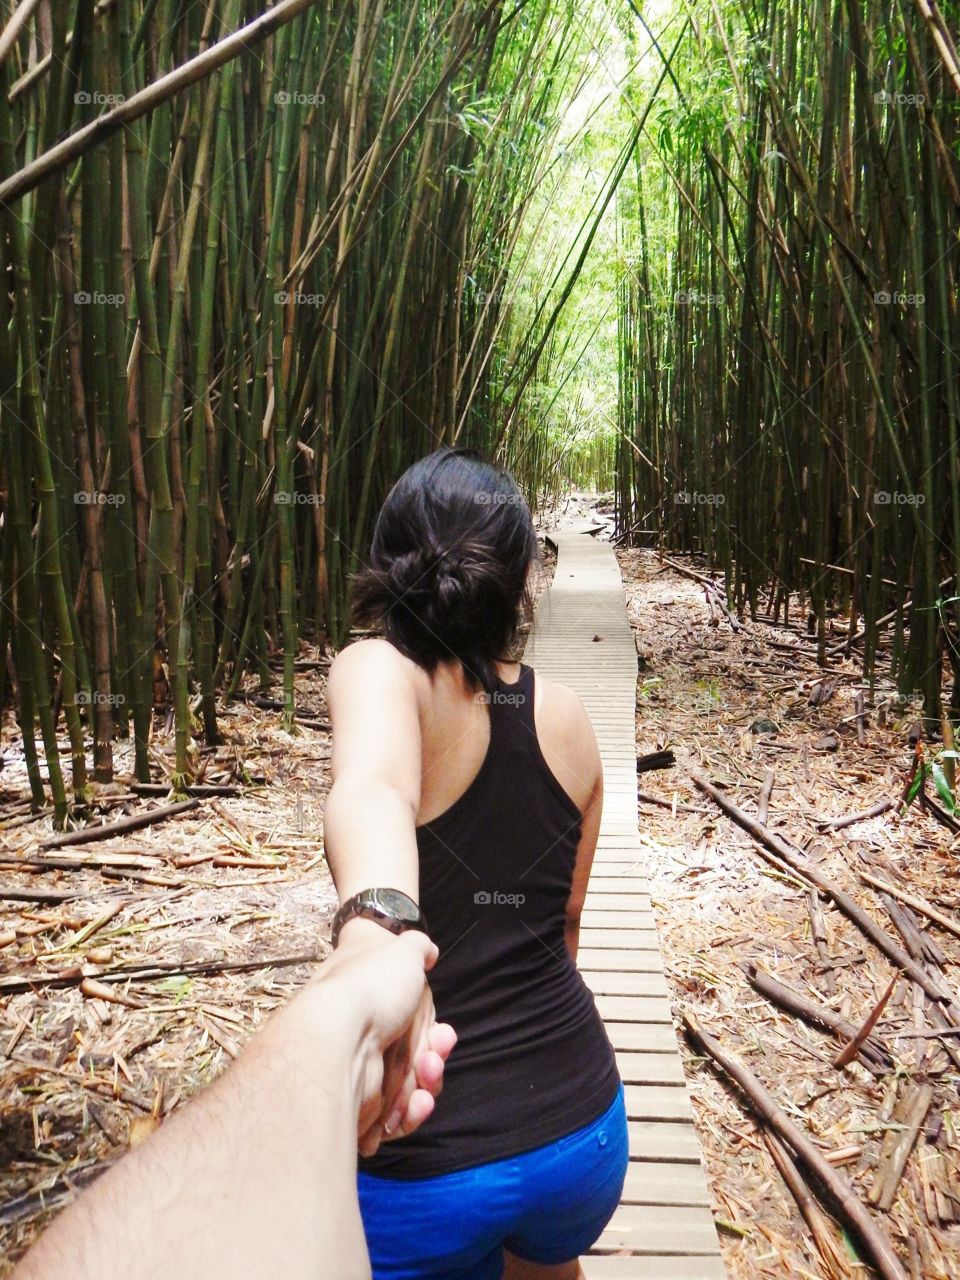 Bamboo Wonder. Maui hiking through bamboo forests to a waterfall. 